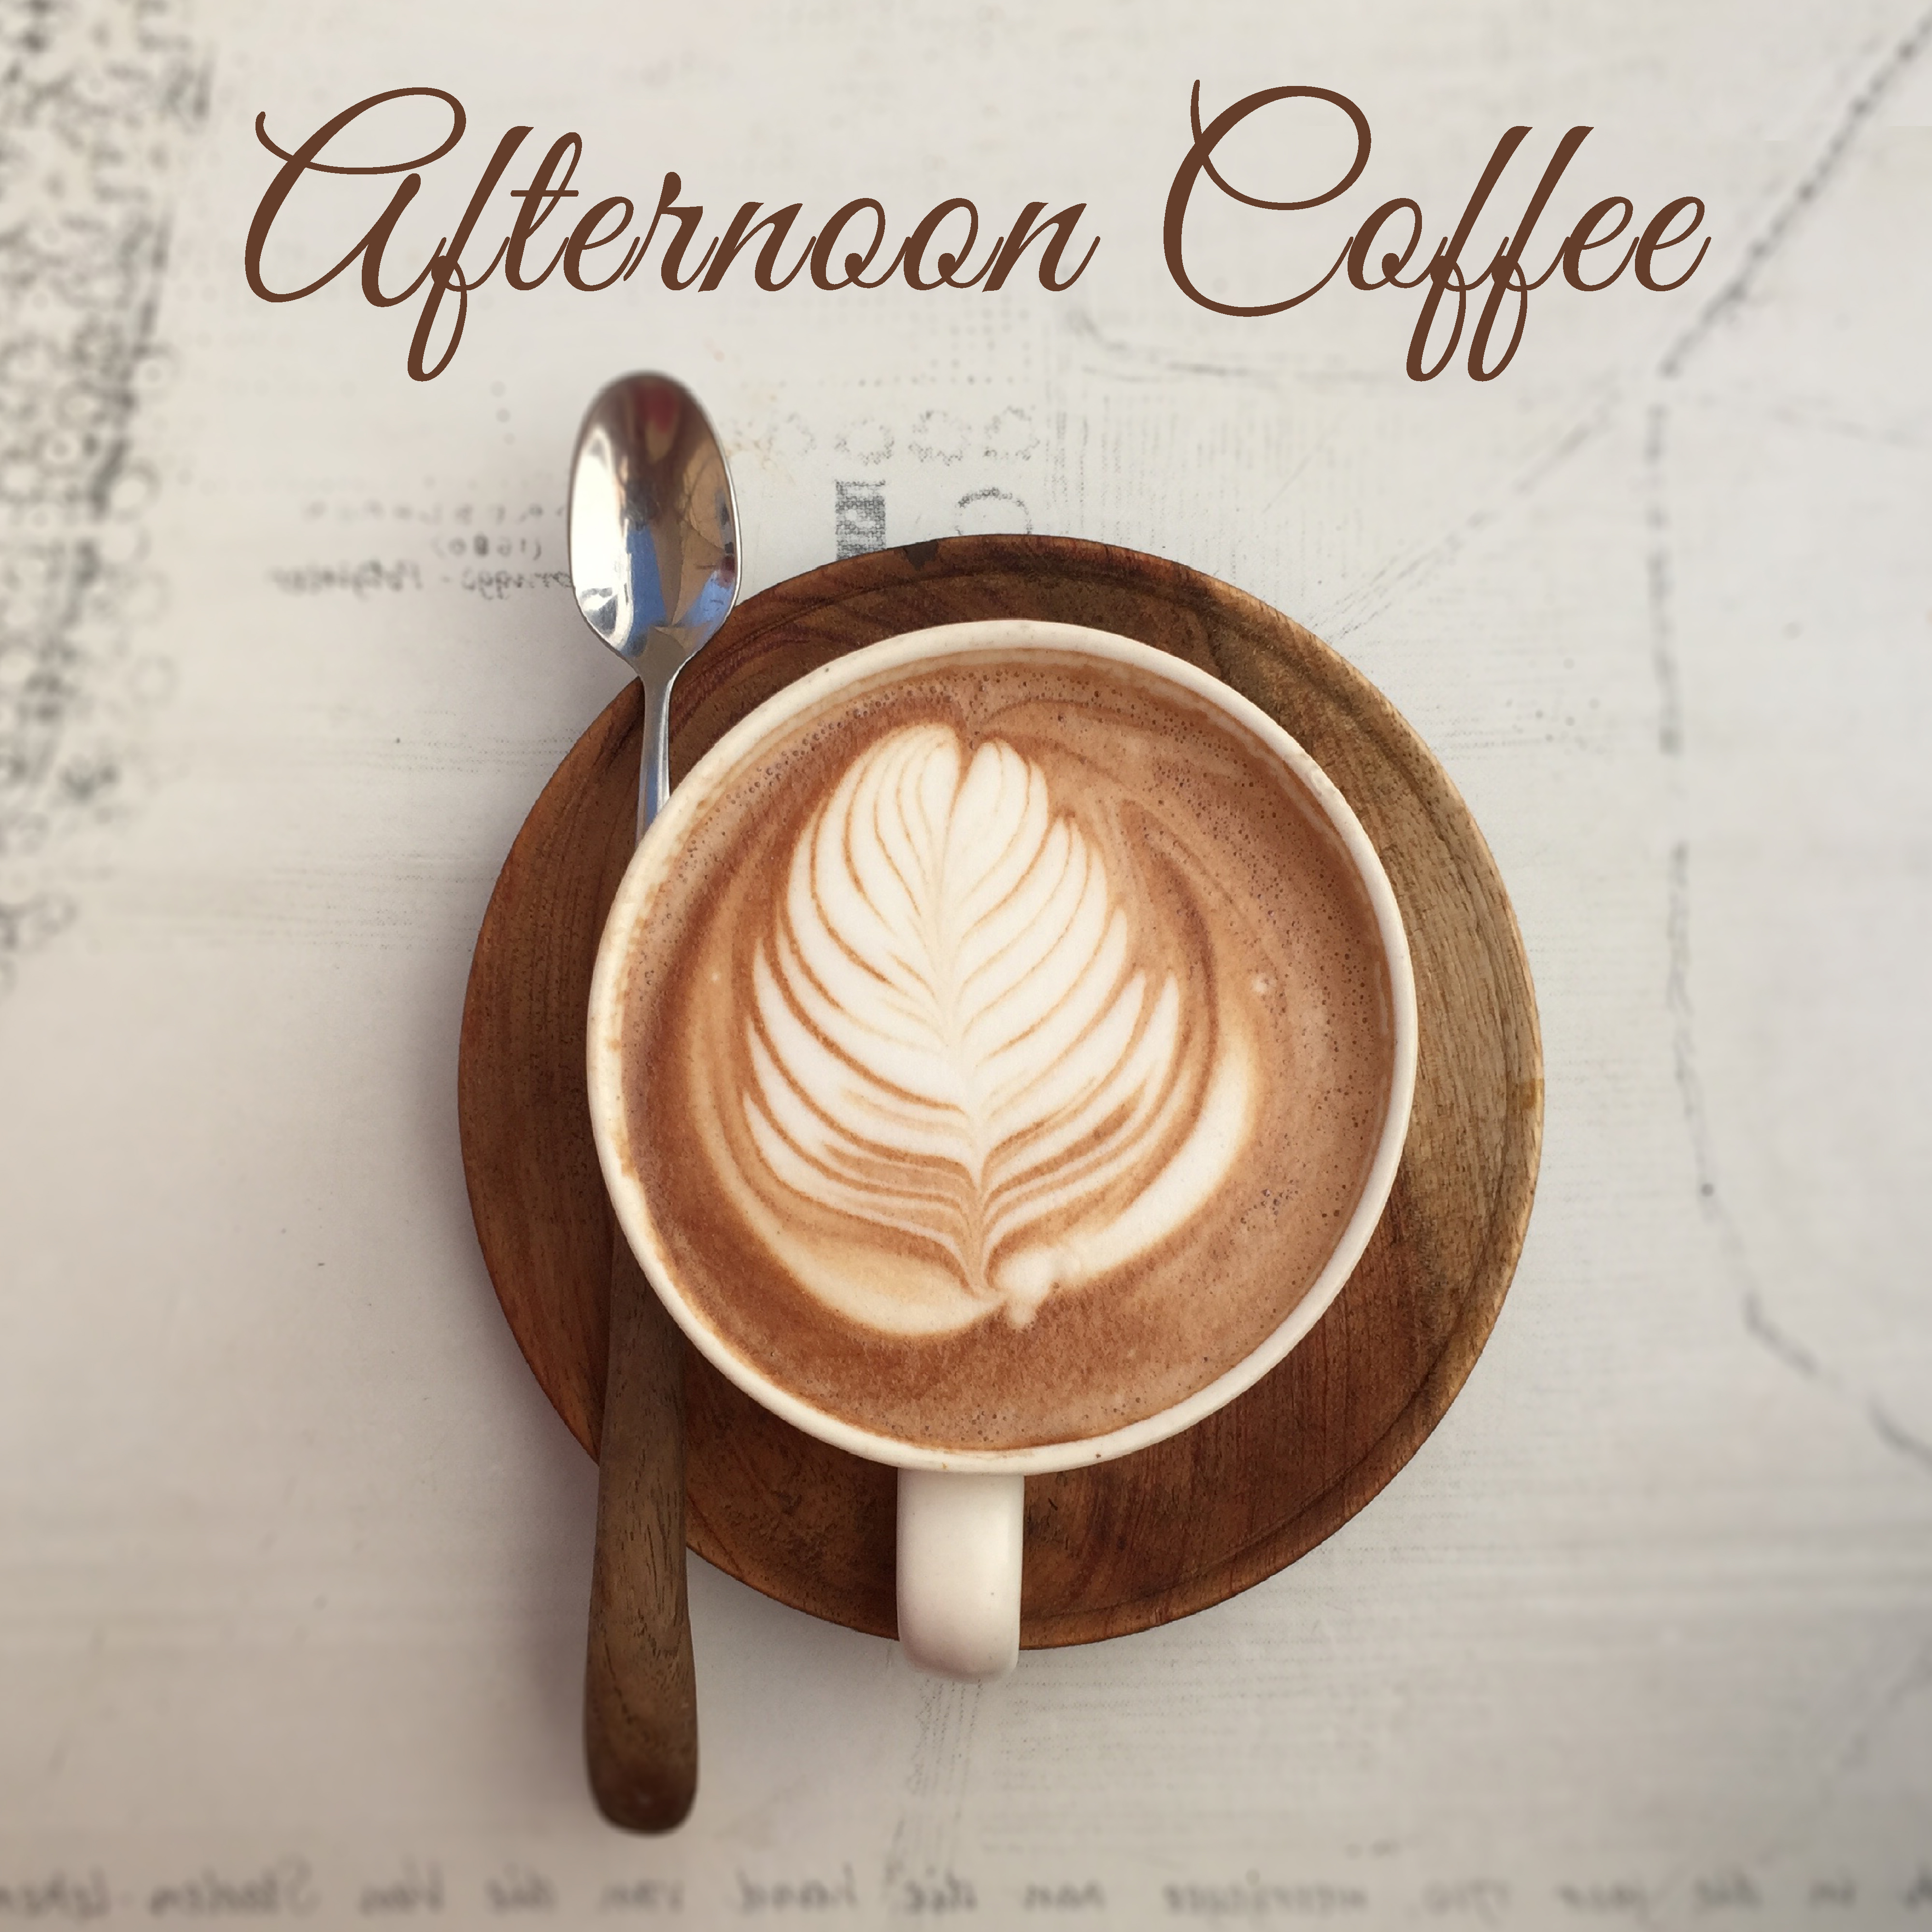 Afternoon Coffee  Restaurant Music, Jazz Cafe, Coffee Talk, Pure Relaxation, Stress Relief, Mellow Jazz, Ambient Music